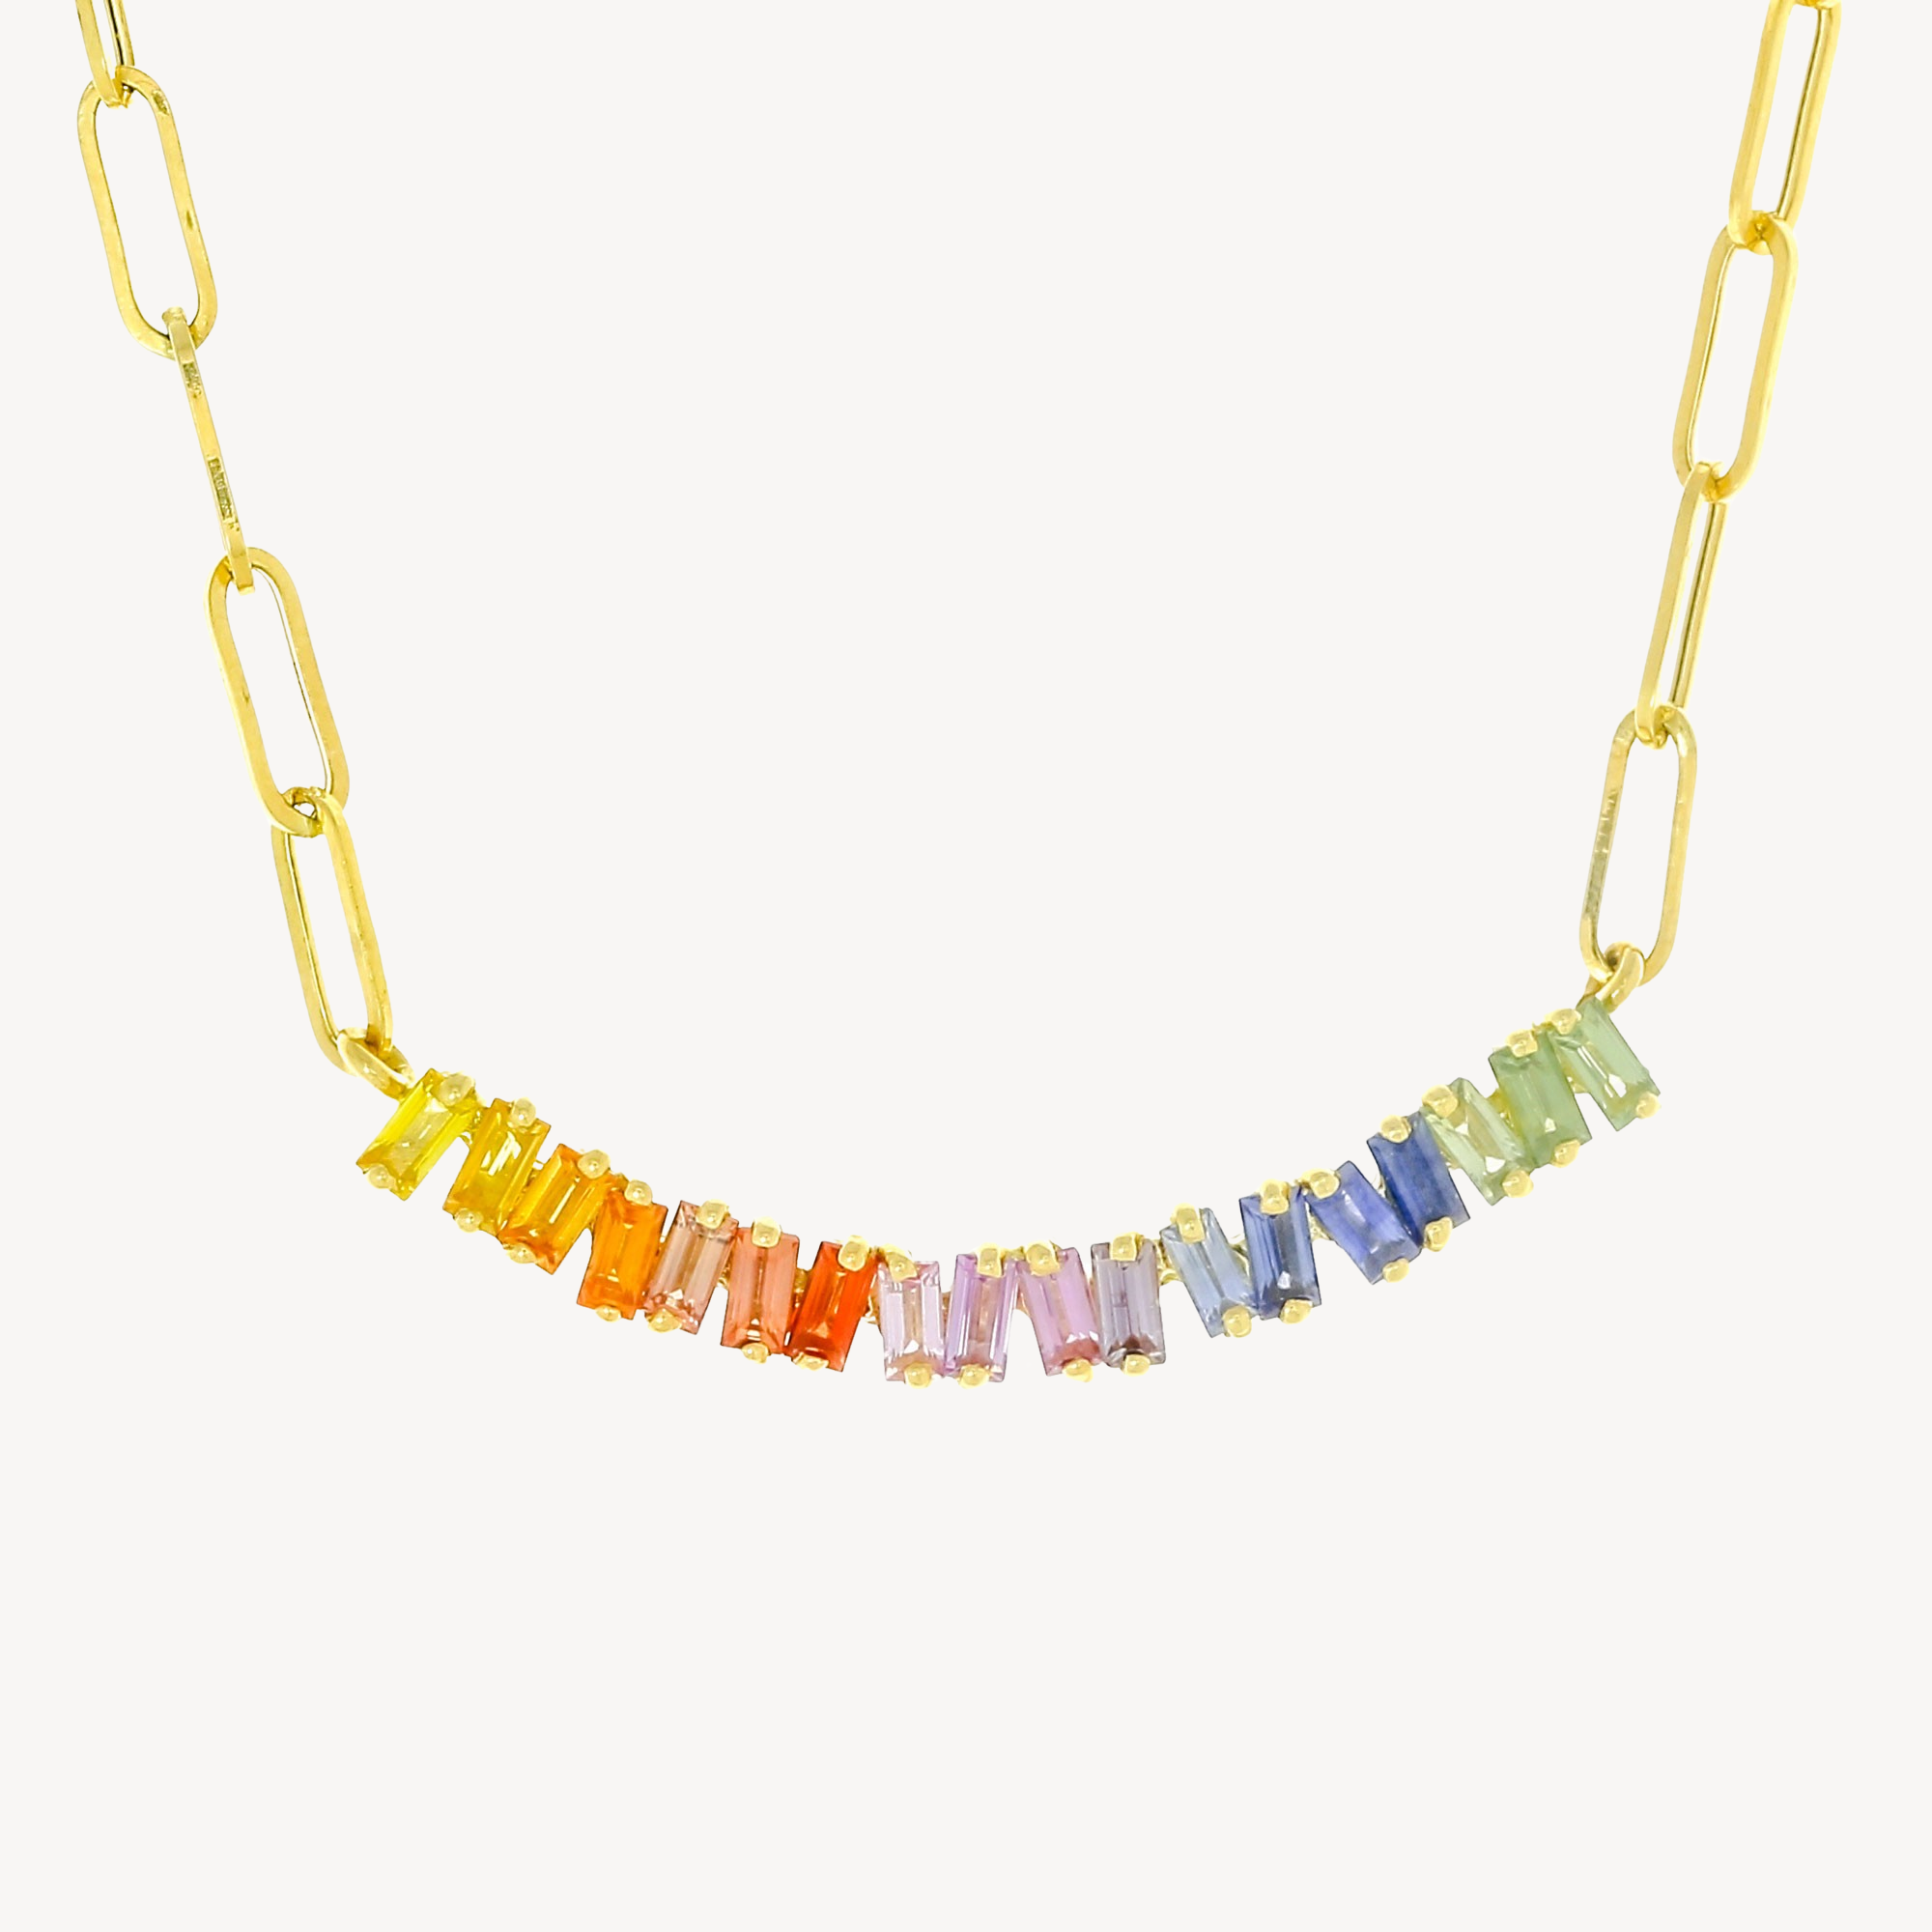 Chasing Rainbows Necklace